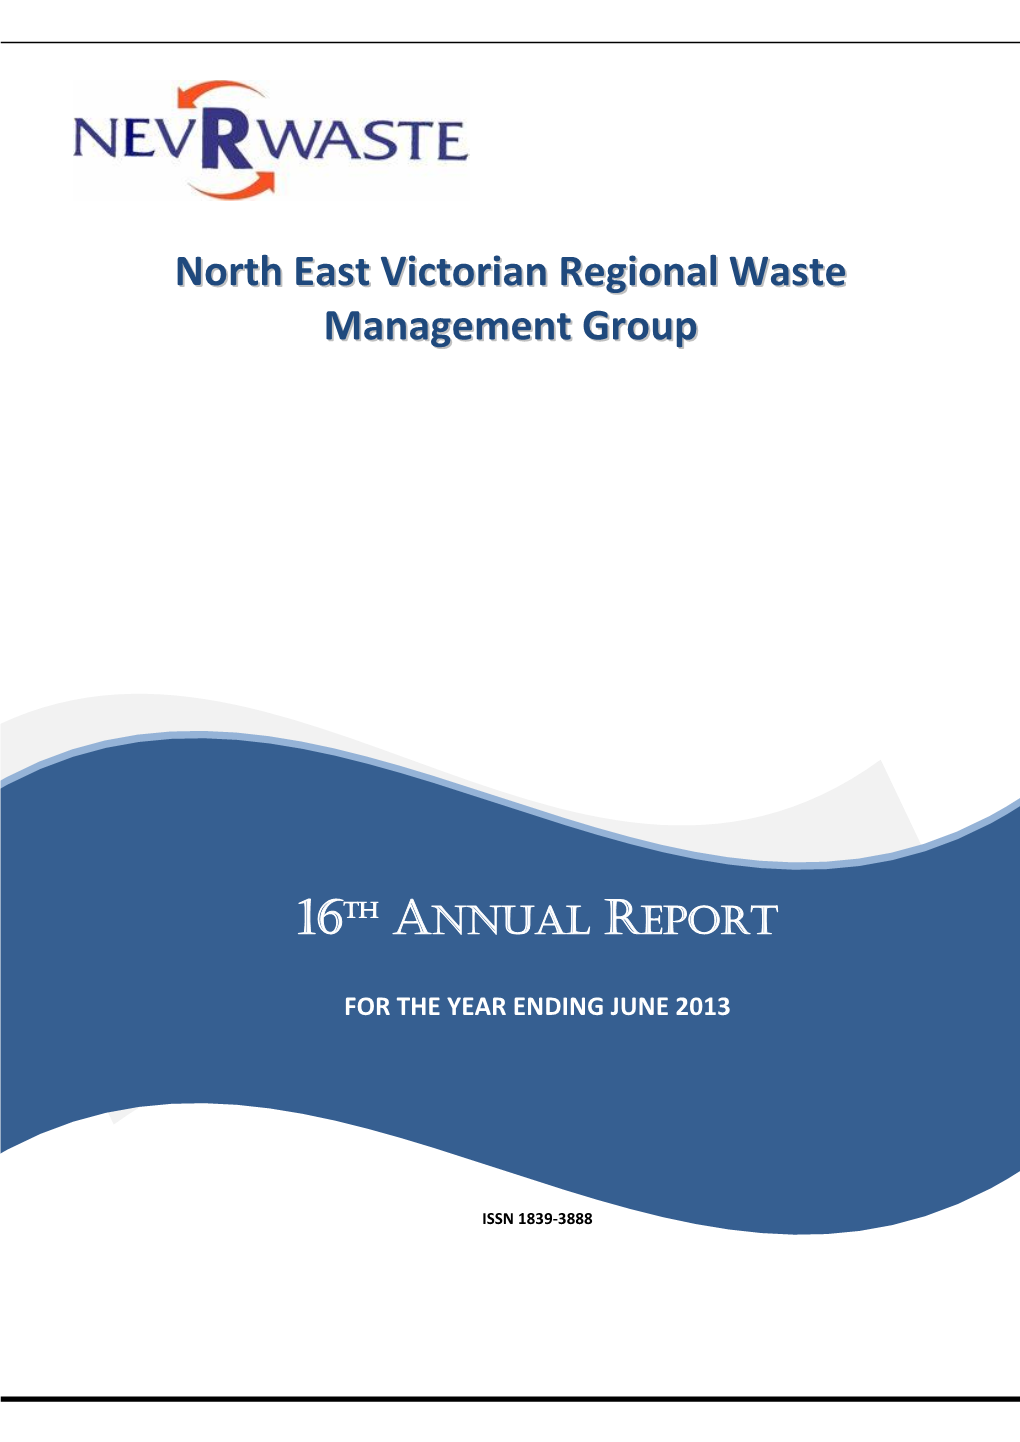 North East Victorian Regional Waste Management Group (Nevrwaste), Annual Report for the Year Ending 30Th June 2013